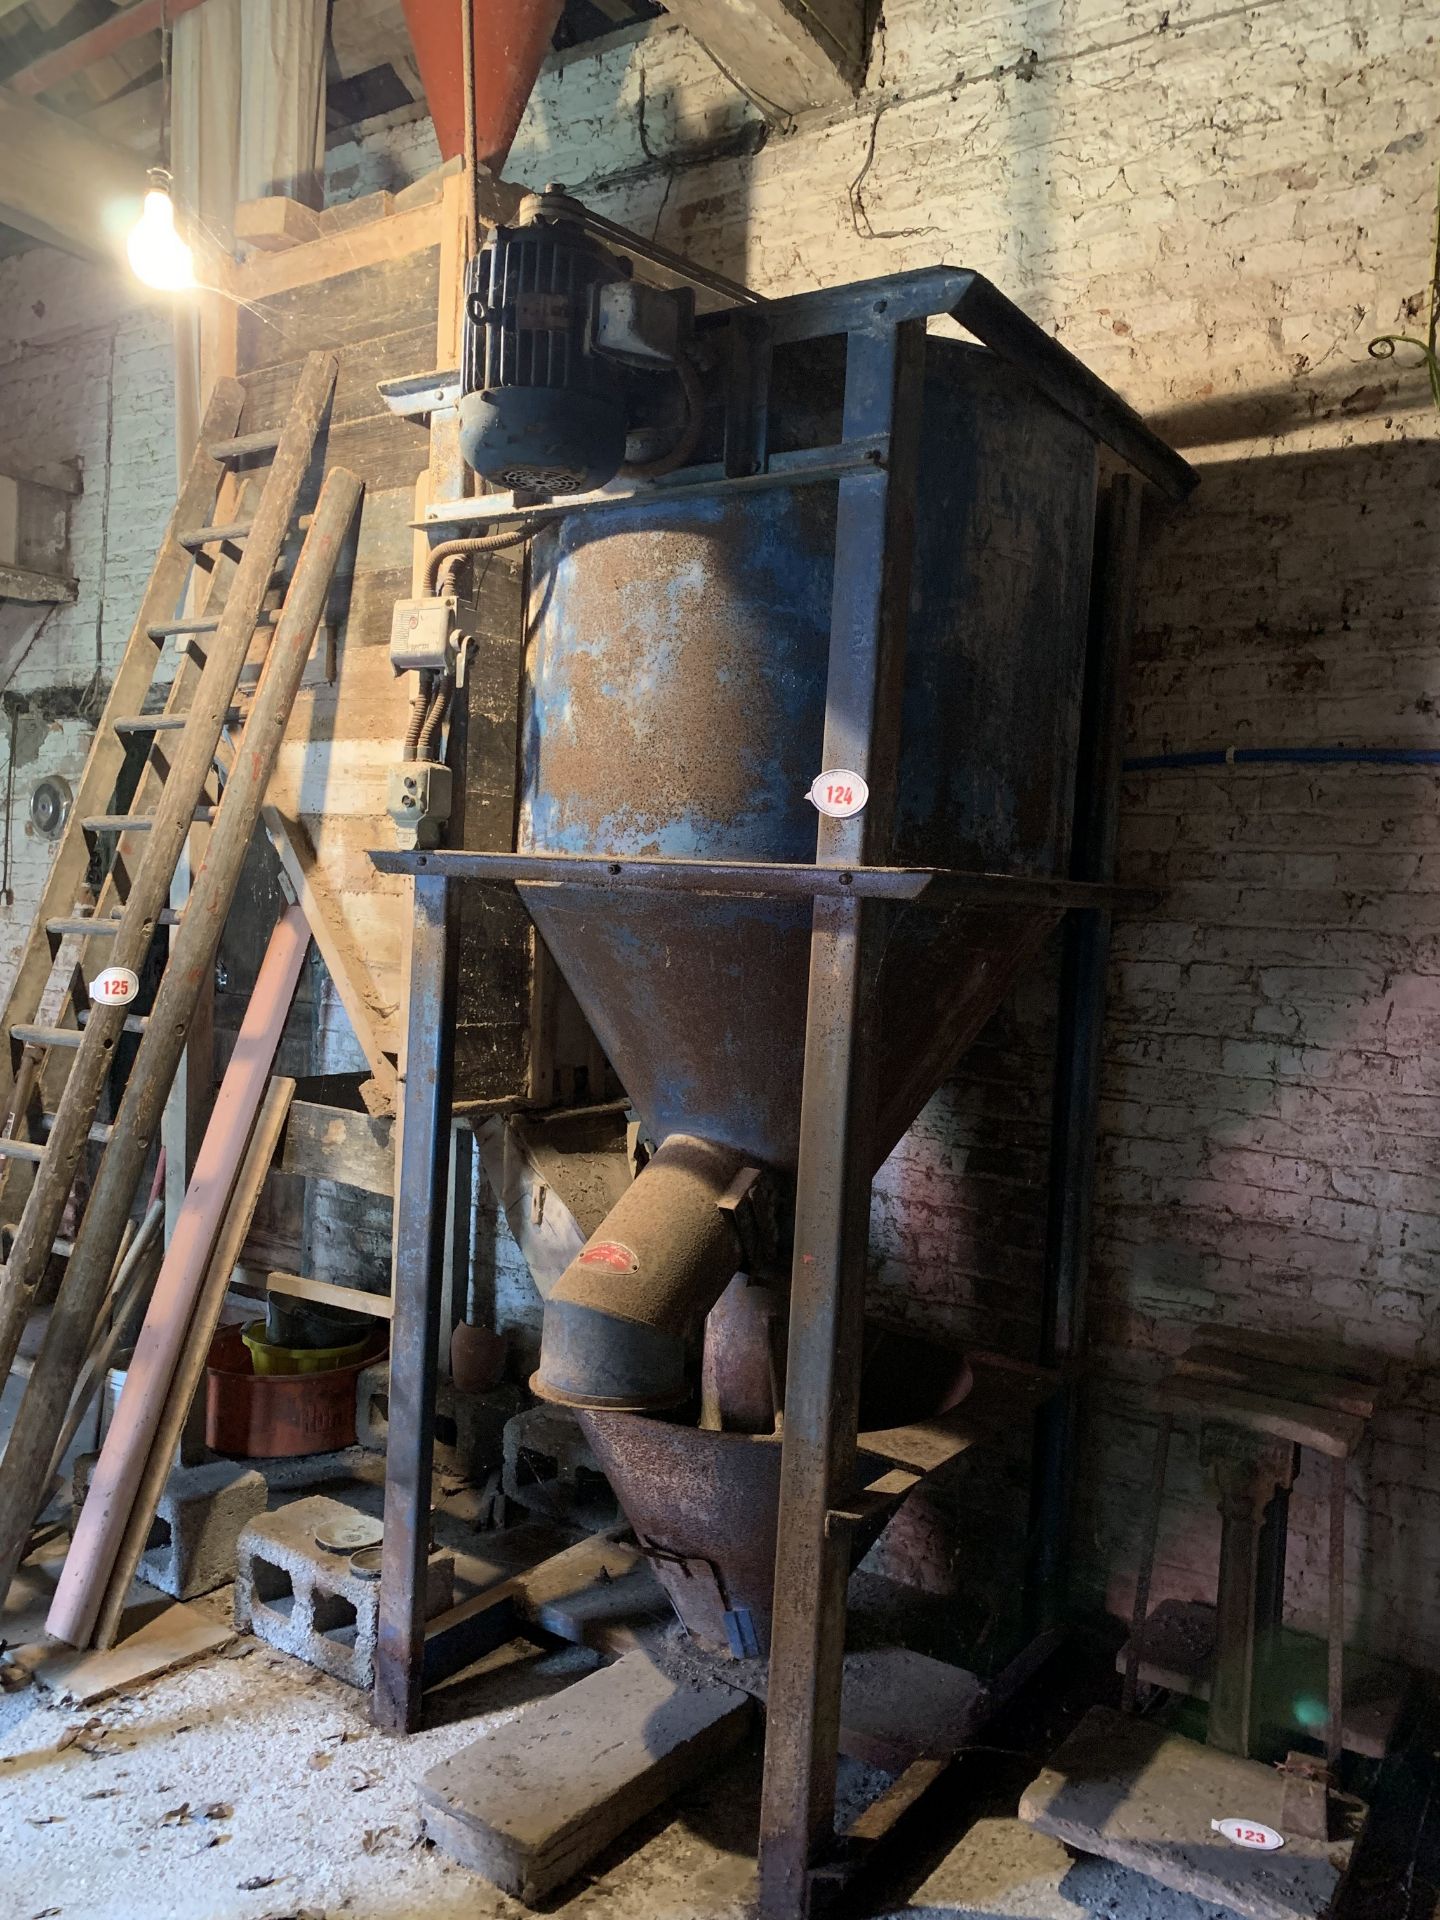 Markham upright feedmill & wooden hopper, PURCHASER TO REMOVE